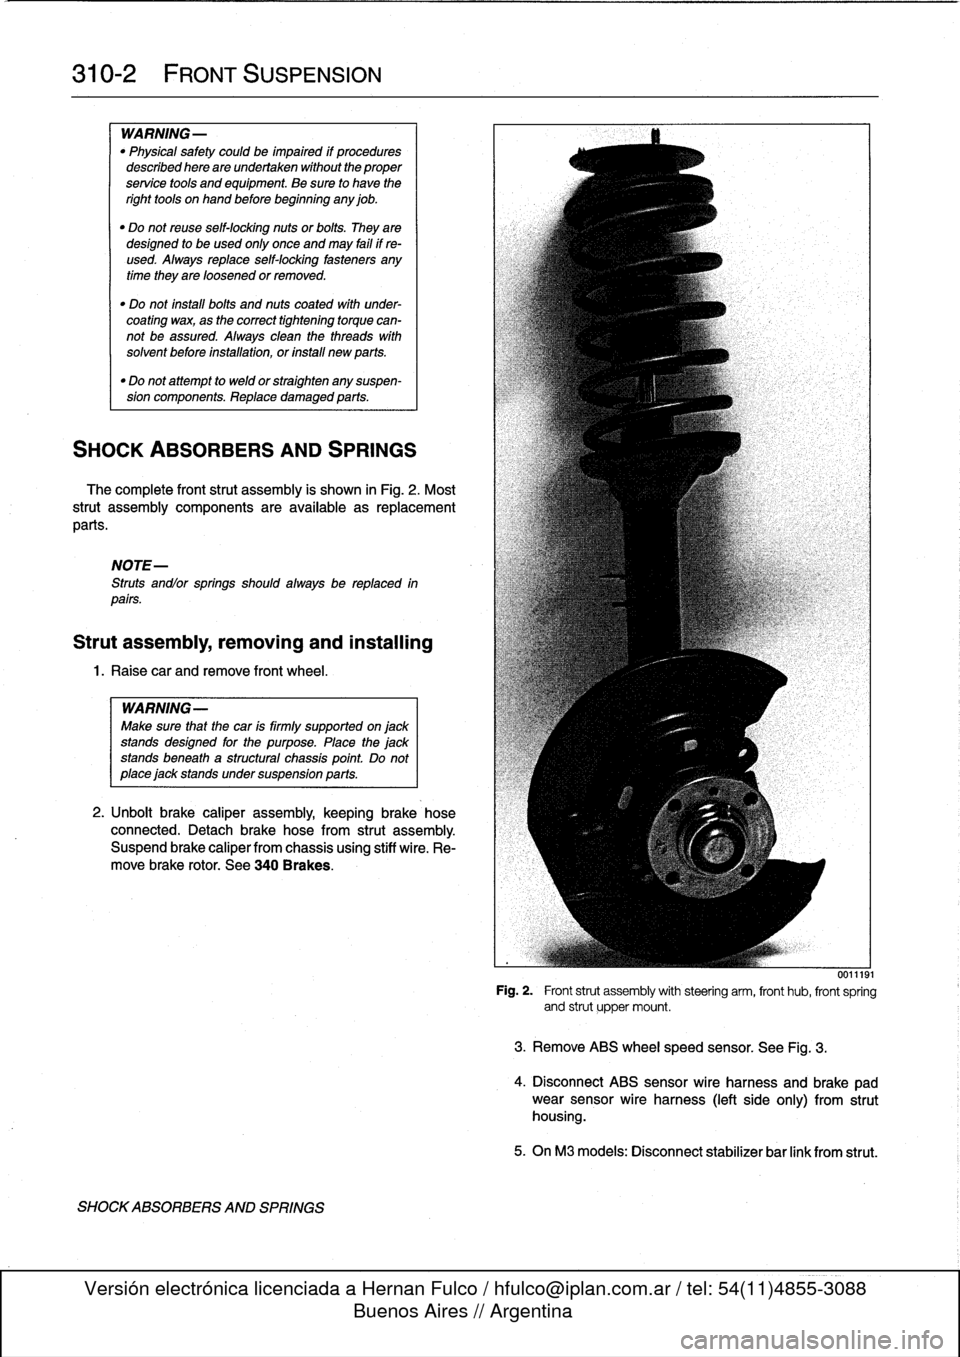 BMW 318i 1997 E36 Workshop Manual 
310-2

	

FRONT
SUSPENSION

WARNING-

"
Physical
safety
could
be
impaired
if
procedures
described
here
areundertaken
without
the
proper
service
tools
and
equipment
.
Be
sure
to
have
the
right
tools
o